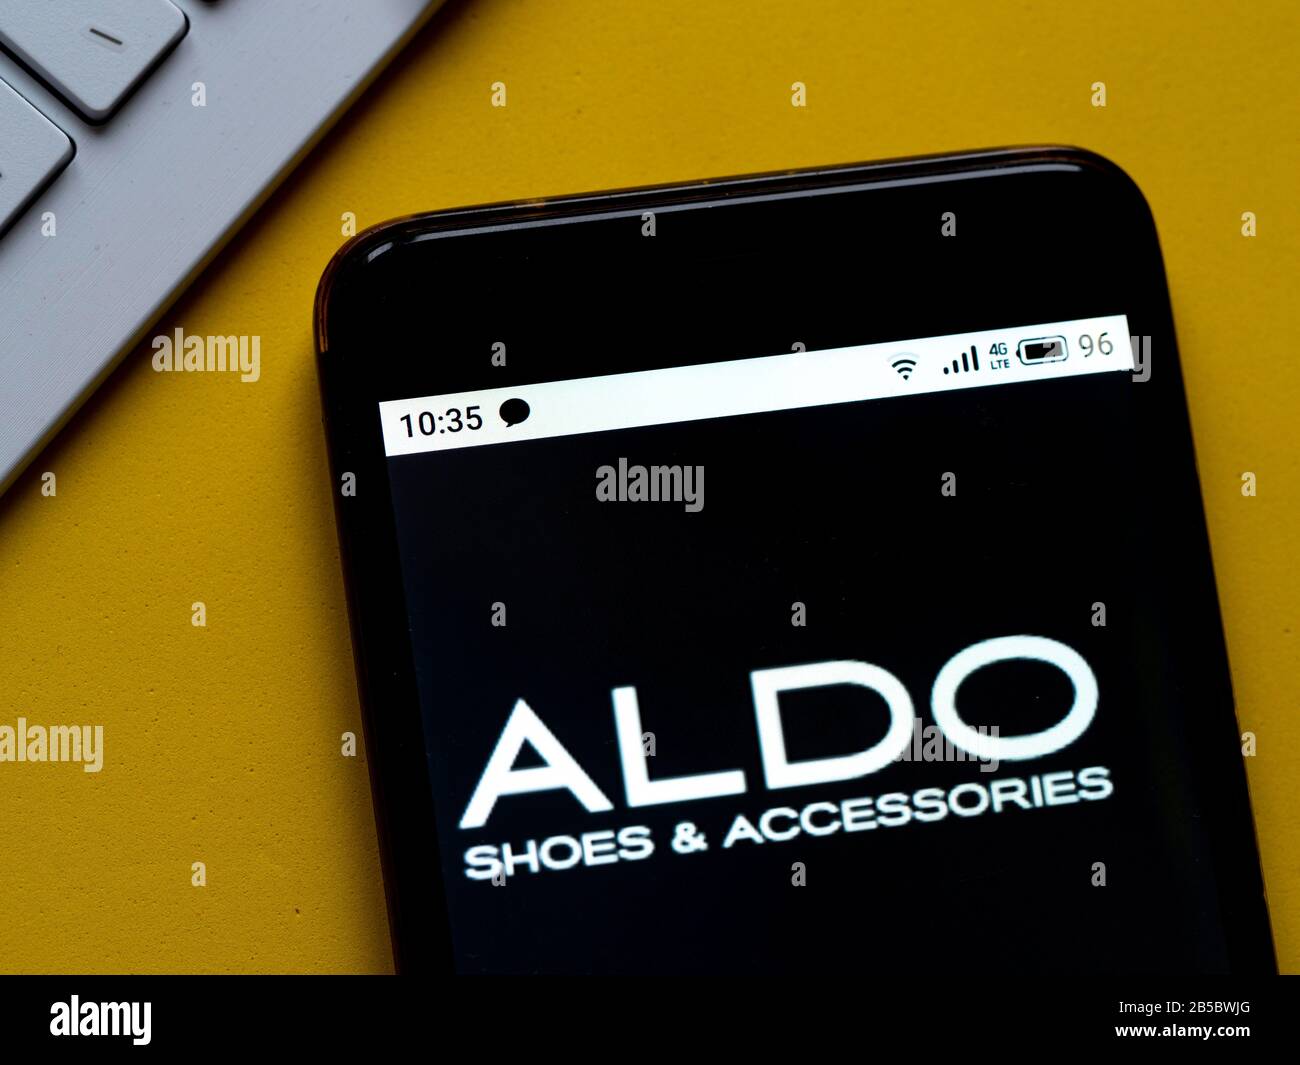 Ukraine. 8th Mar, 2020. In this illustration an Aldo Shoes & accessories logo seen displayed on a smartphone. Credit: Igor Golovniov/SOPA Images/ZUMA Wire/Alamy Live News Stock Photo - Alamy